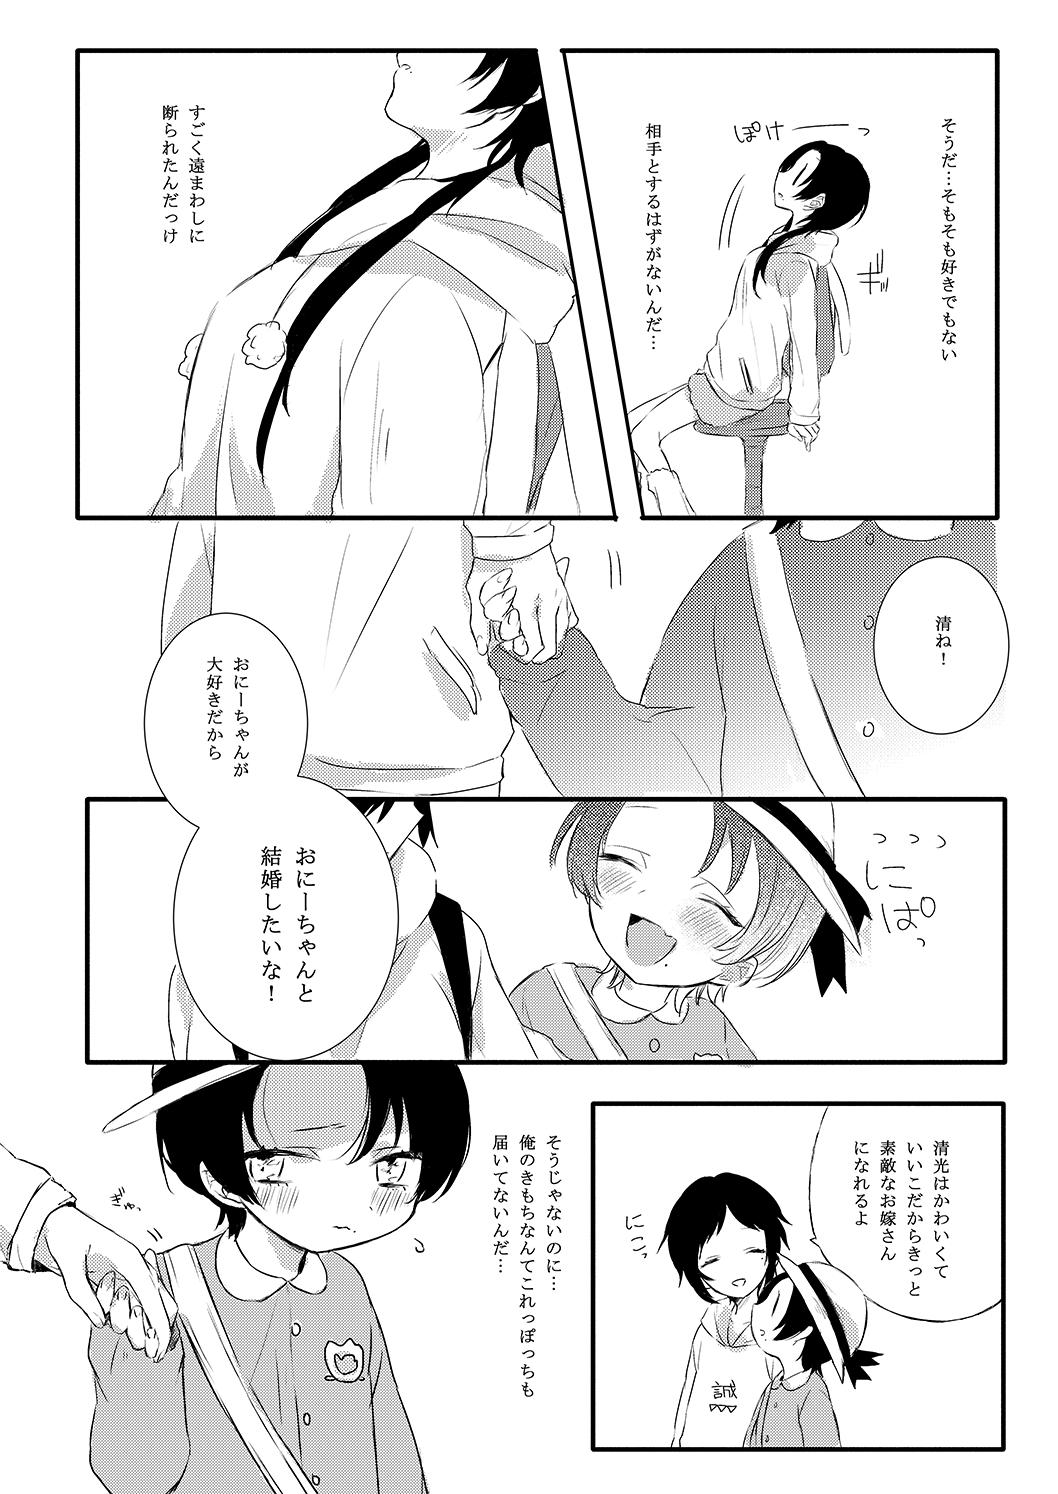 Bubble BROTHER COMPLEX + SISTER COMPLEX - Touken ranbu Cumswallow - Page 7